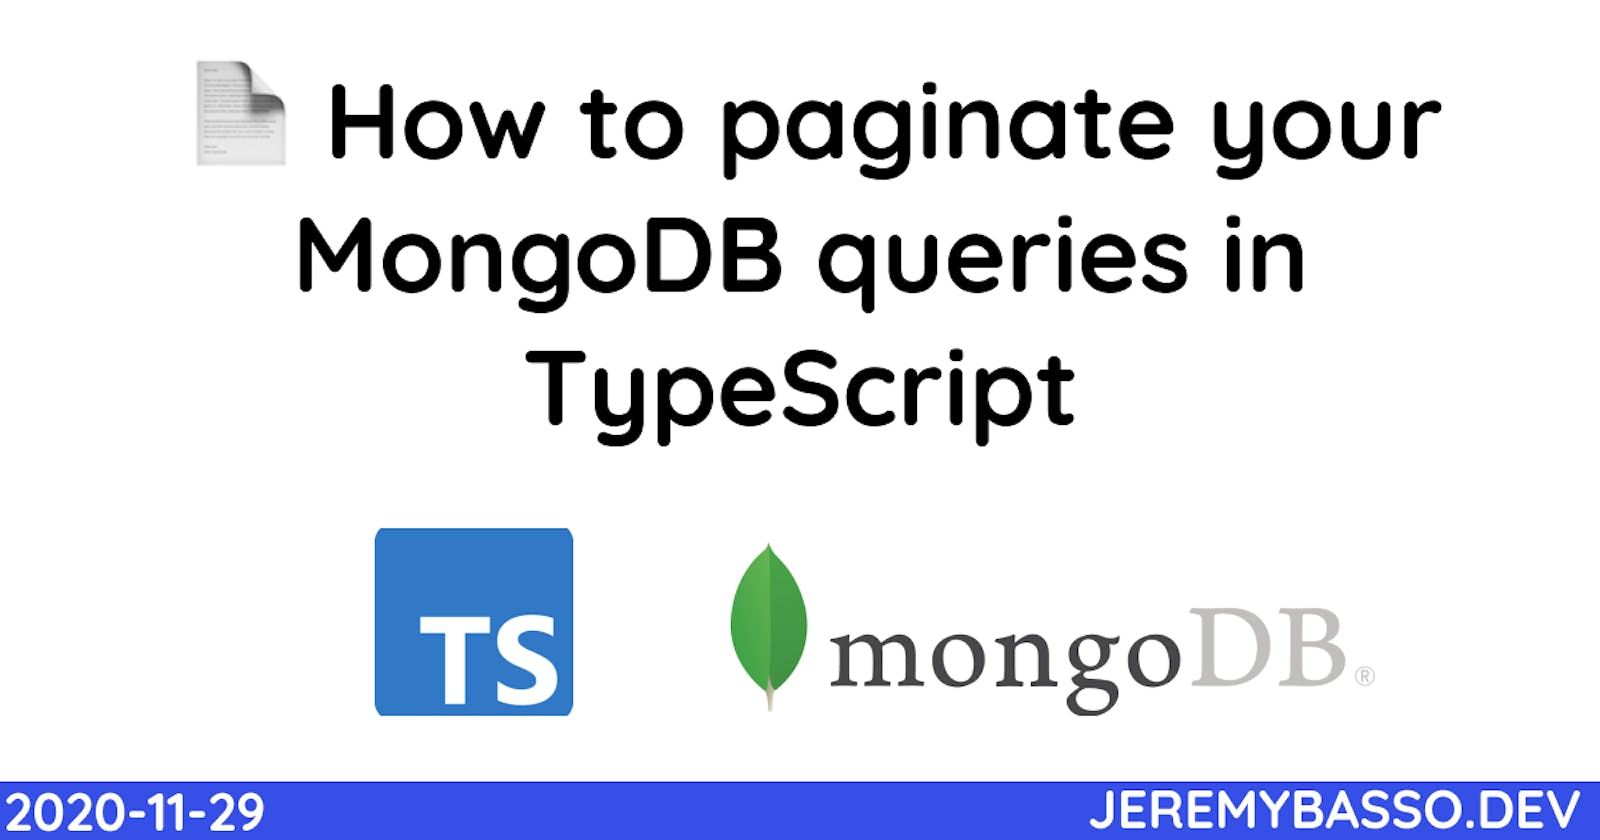 📄 How to paginate your MongoDB queries in TypeScript